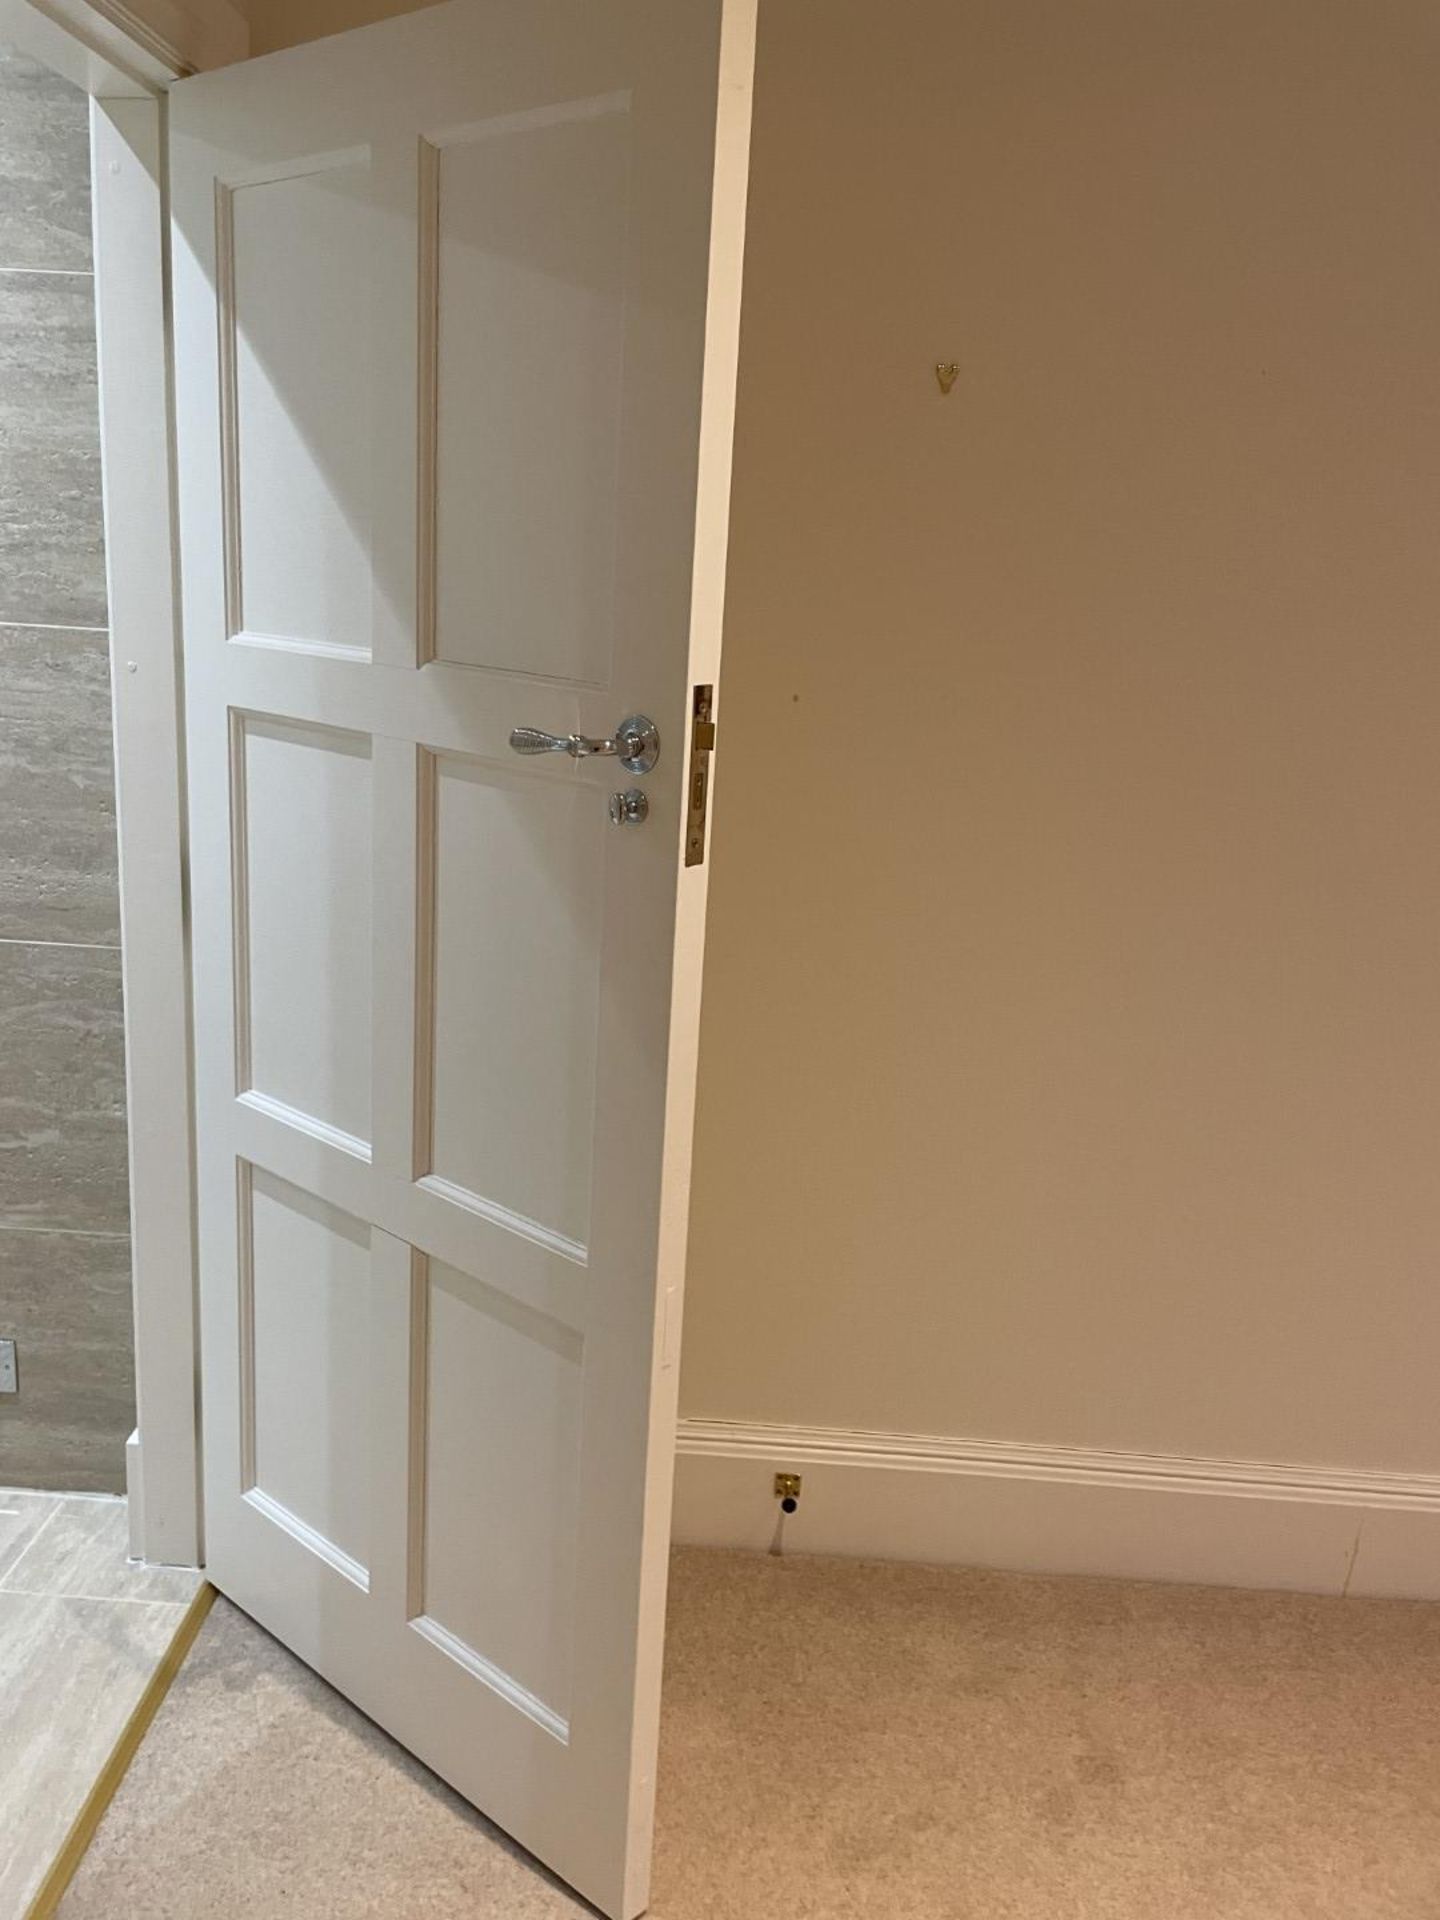 1 x Solid Wood Painted Lockable Internal Door in White - Includes Handles and Hinges - Image 5 of 12